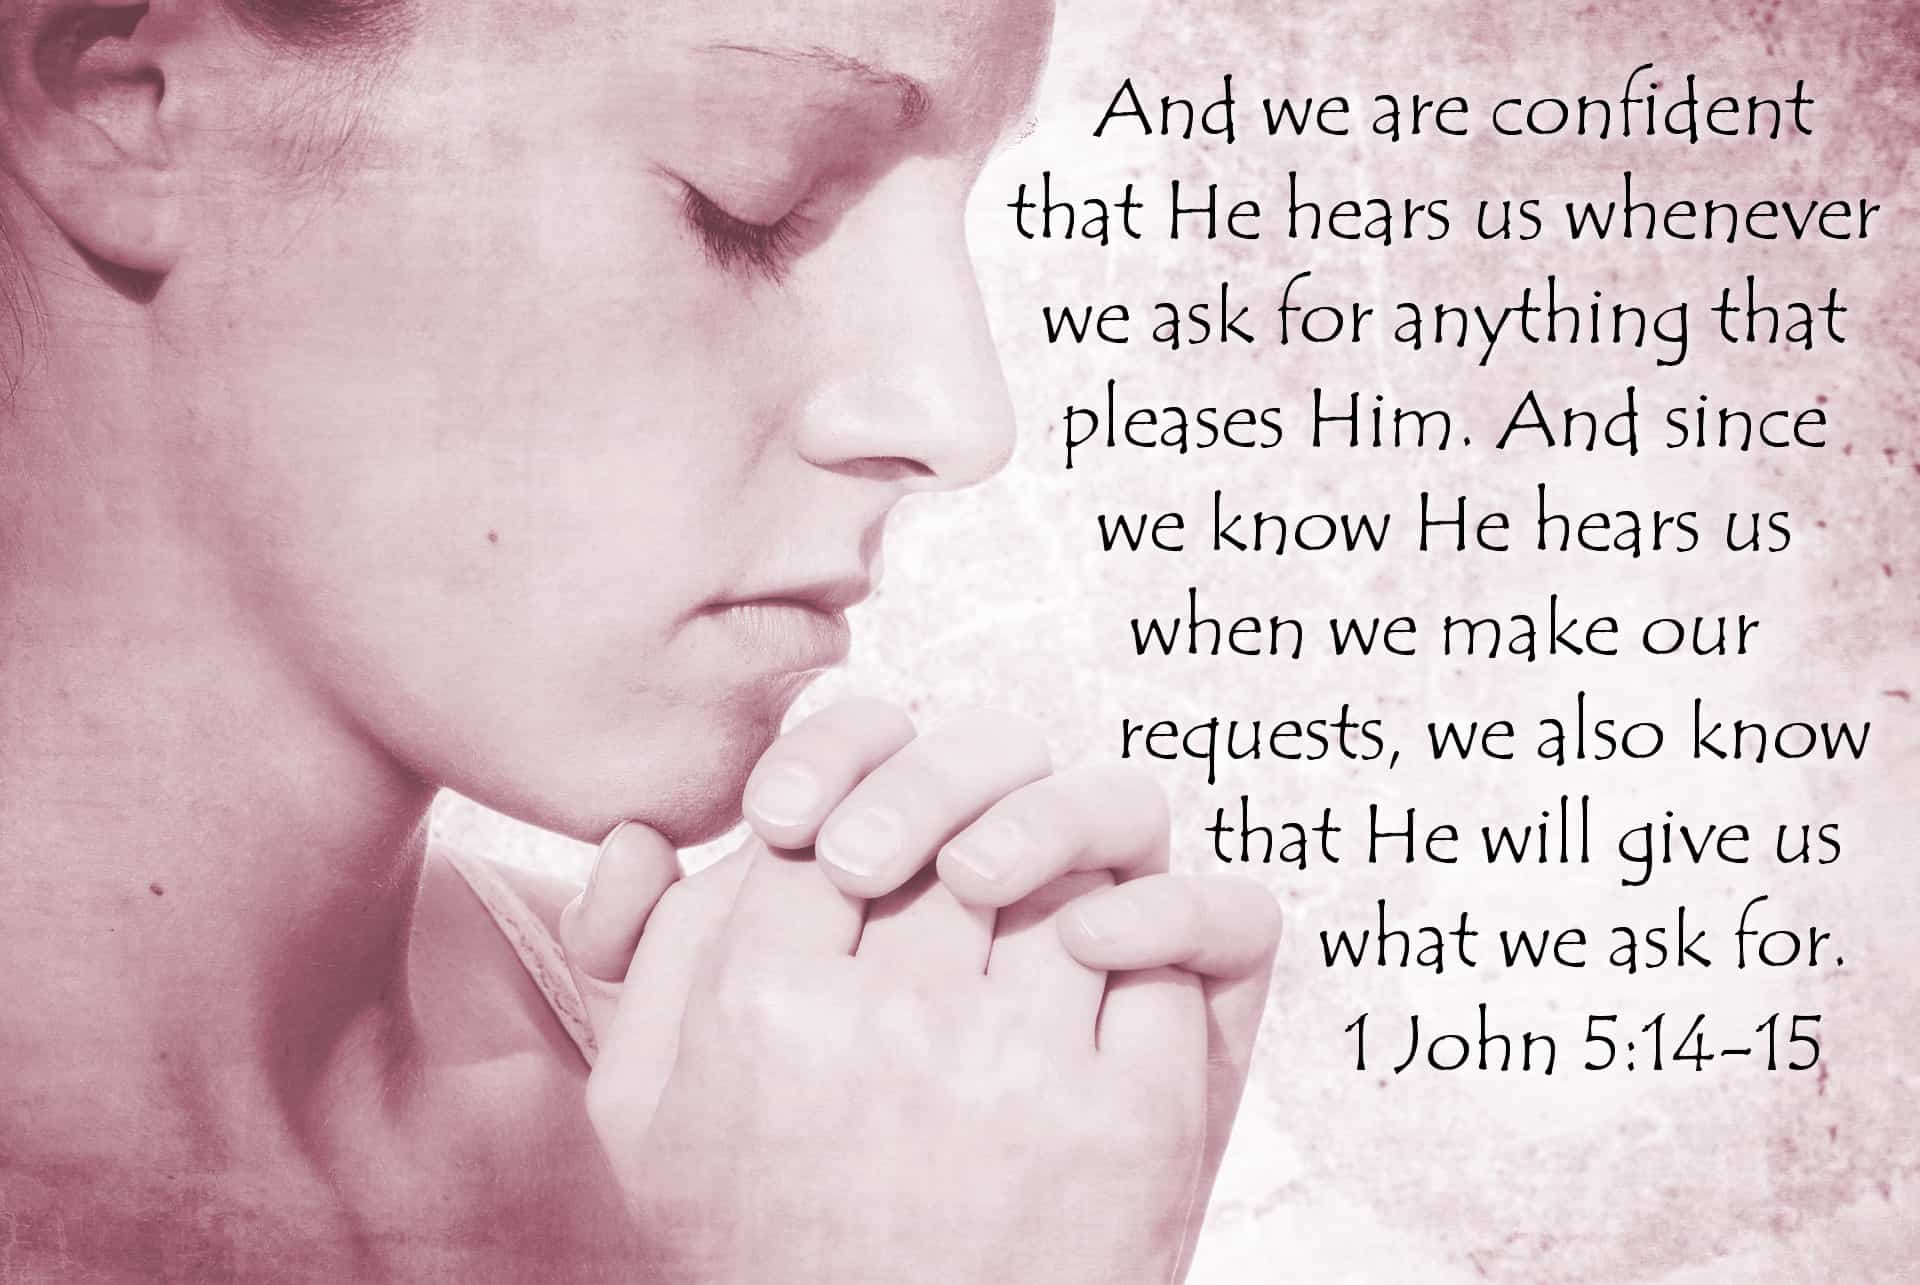 And we are confident that He hears us whenever we ask for anything that pleases Him. And since we know He hears us when we make our requests, we also know that He will give us what we ask for. 1 John 5:14-15